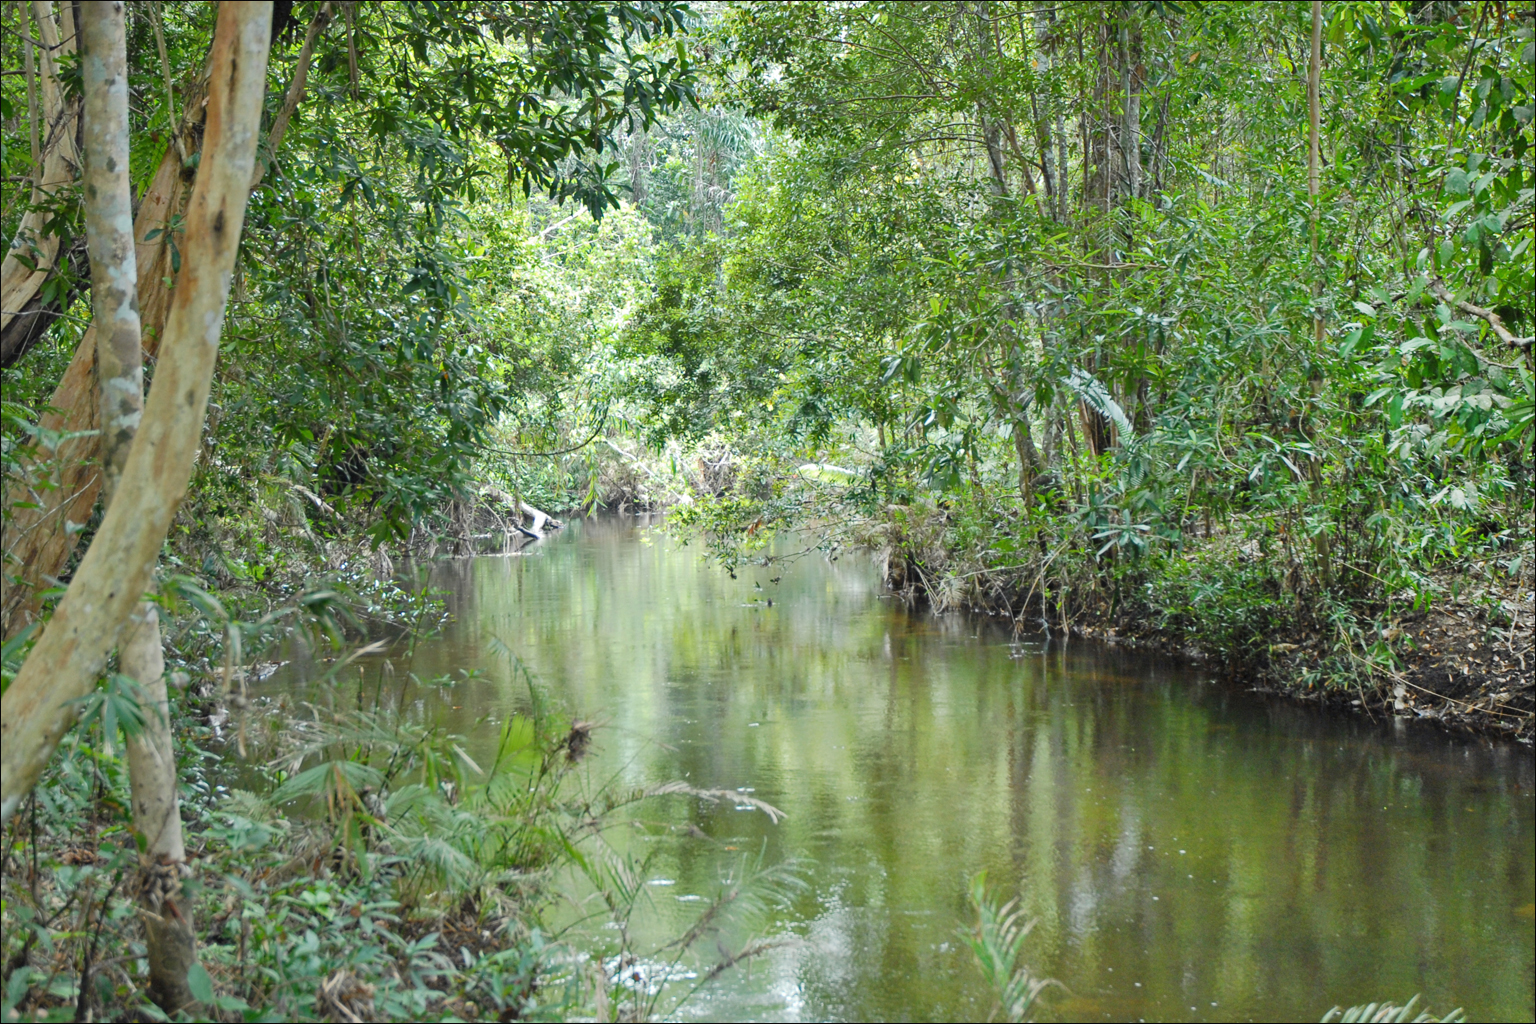 a green river surrounded by trees and grass